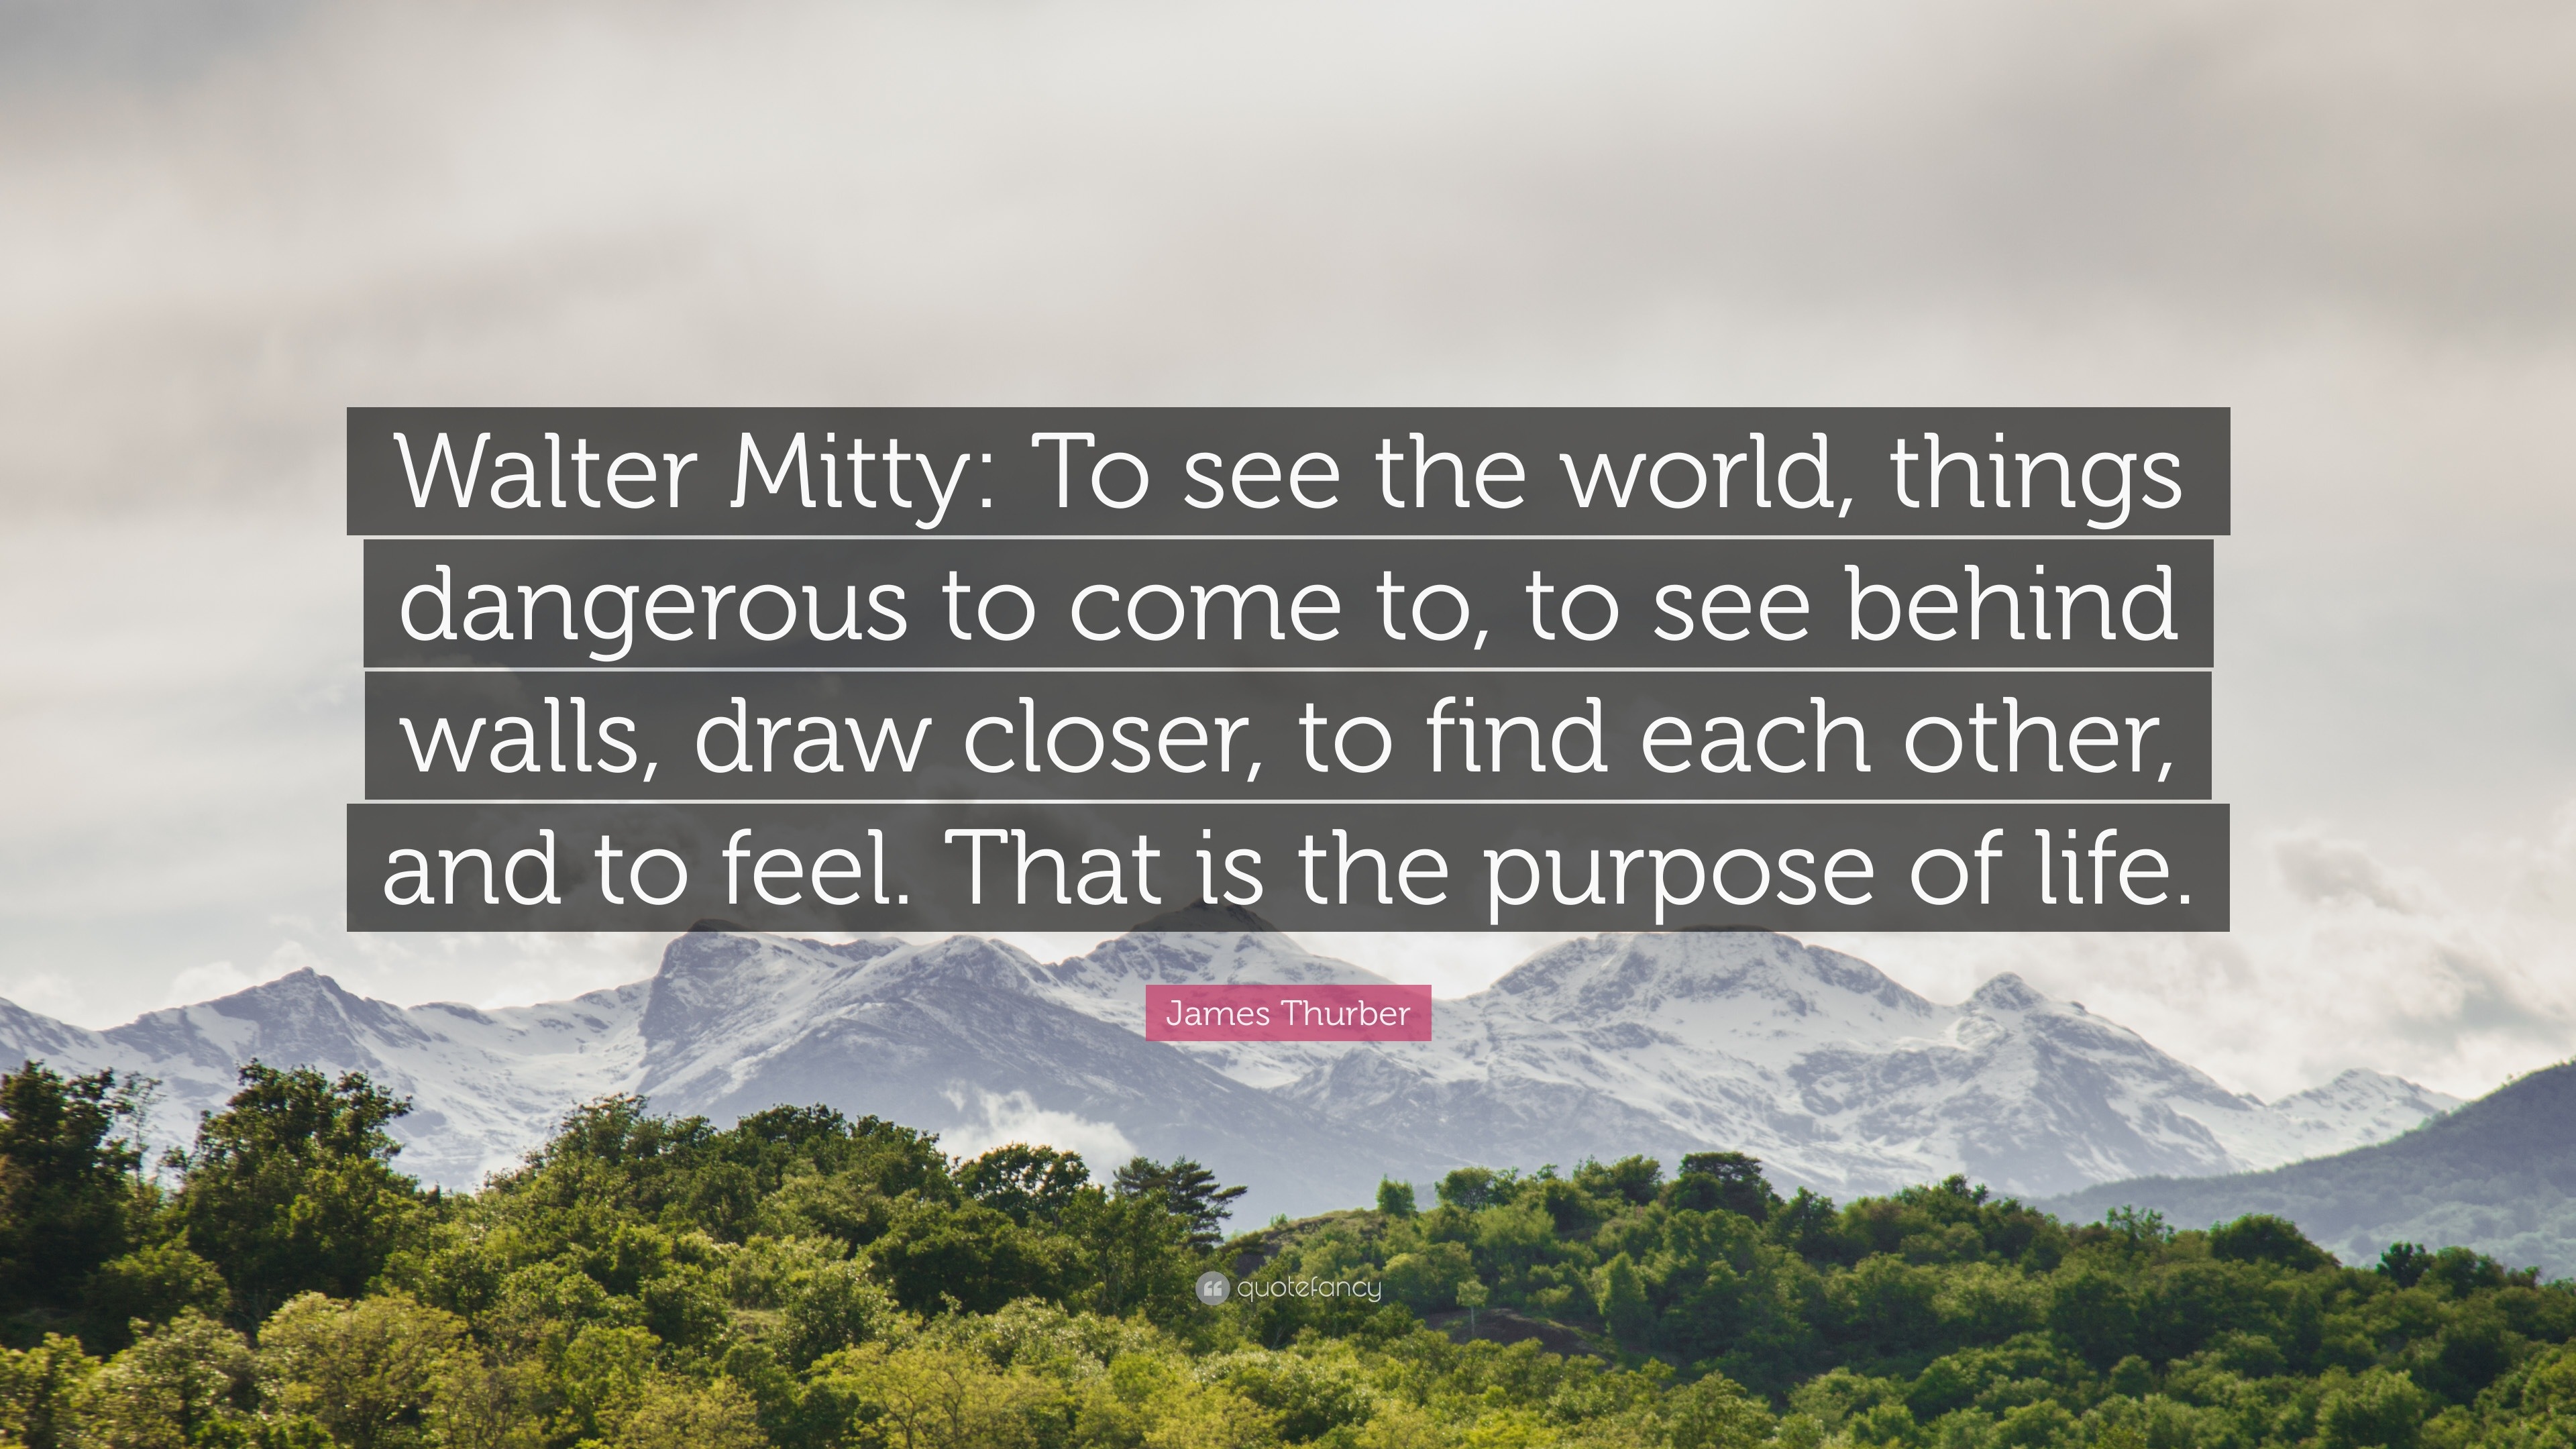 James Thurber Quote “Walter Mitty To see the world things dangerous to